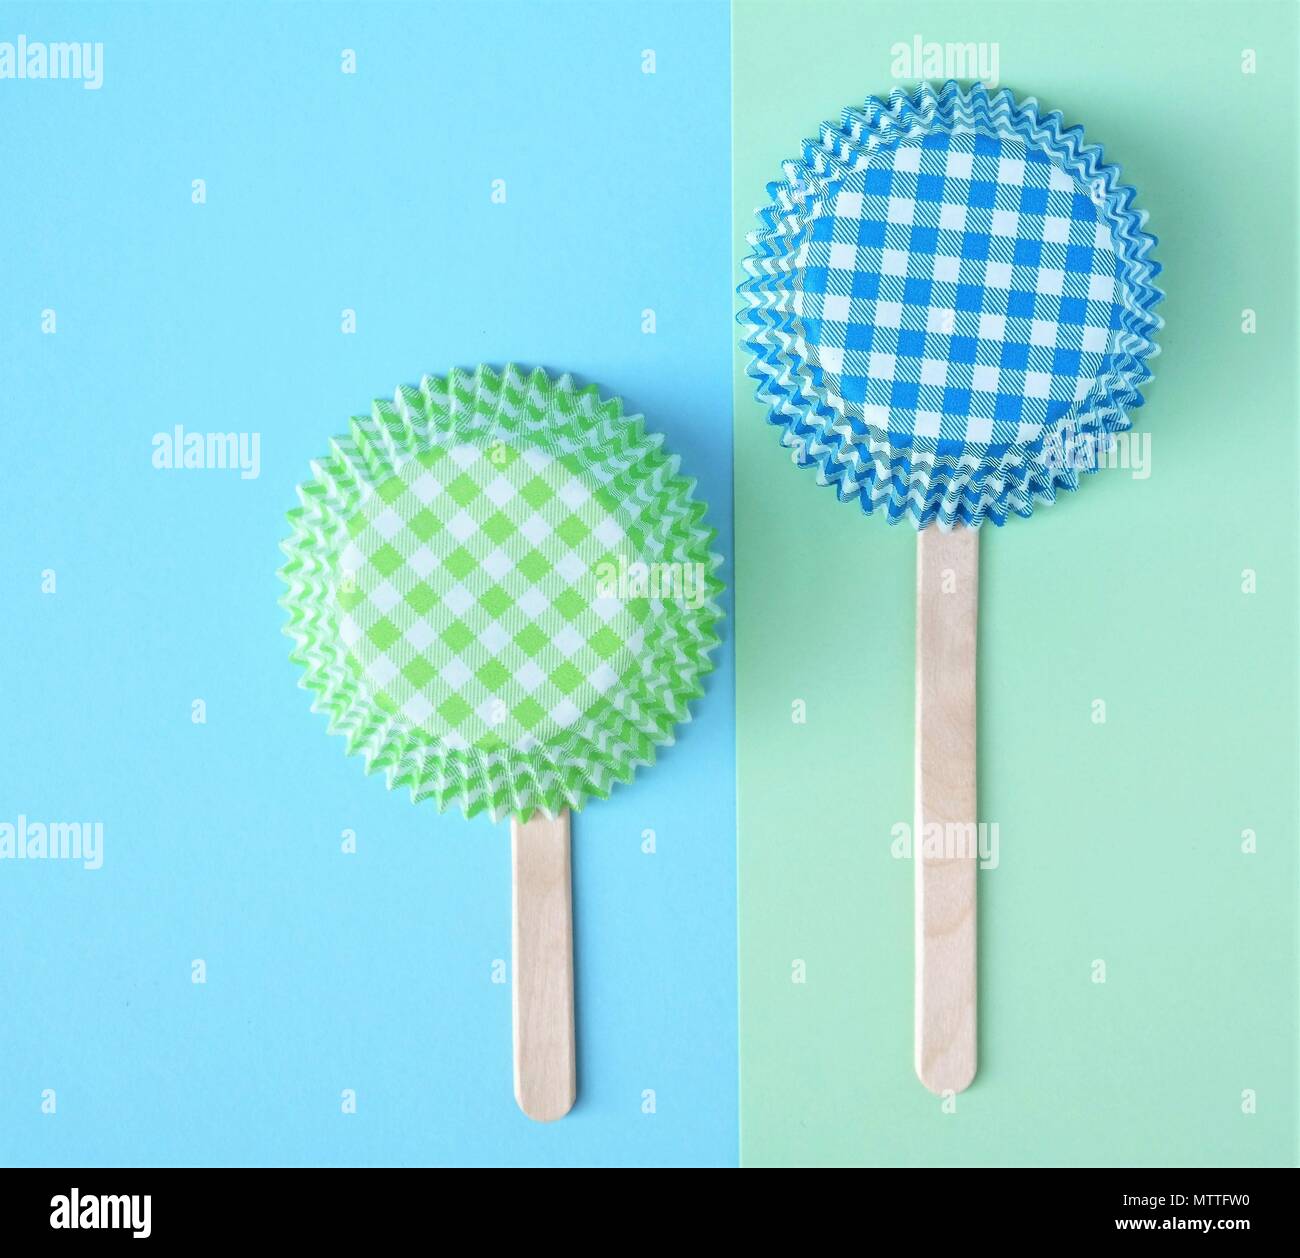 Two cupcake molds connected with a popsicle stick. Simple baking background with green and blue colors and text space. Stock Photo